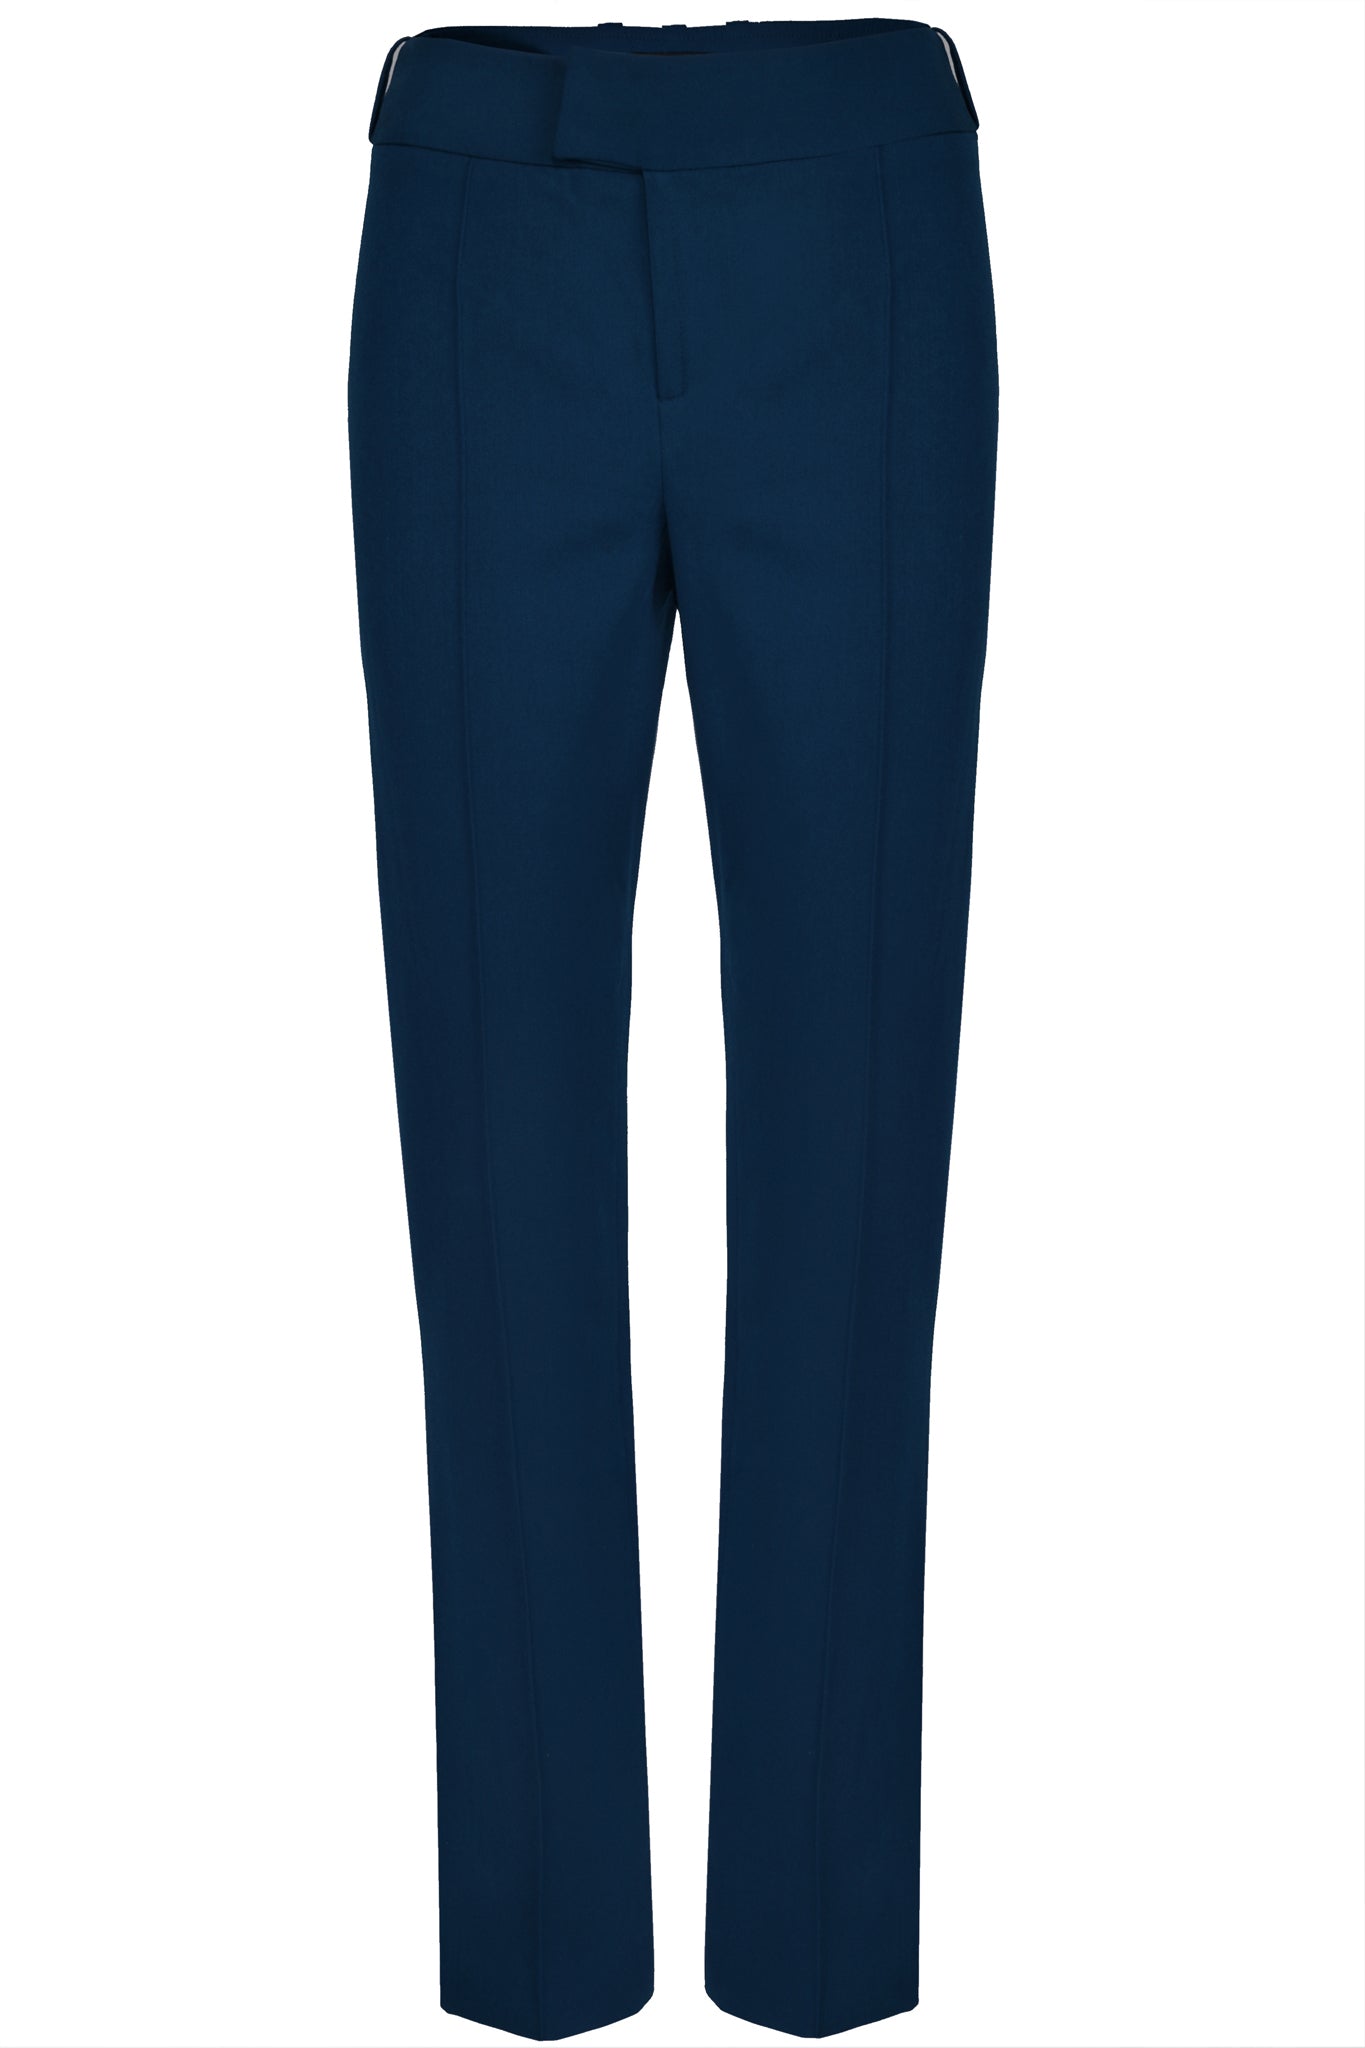 Navy Blue Cropped Cigarette Trousers